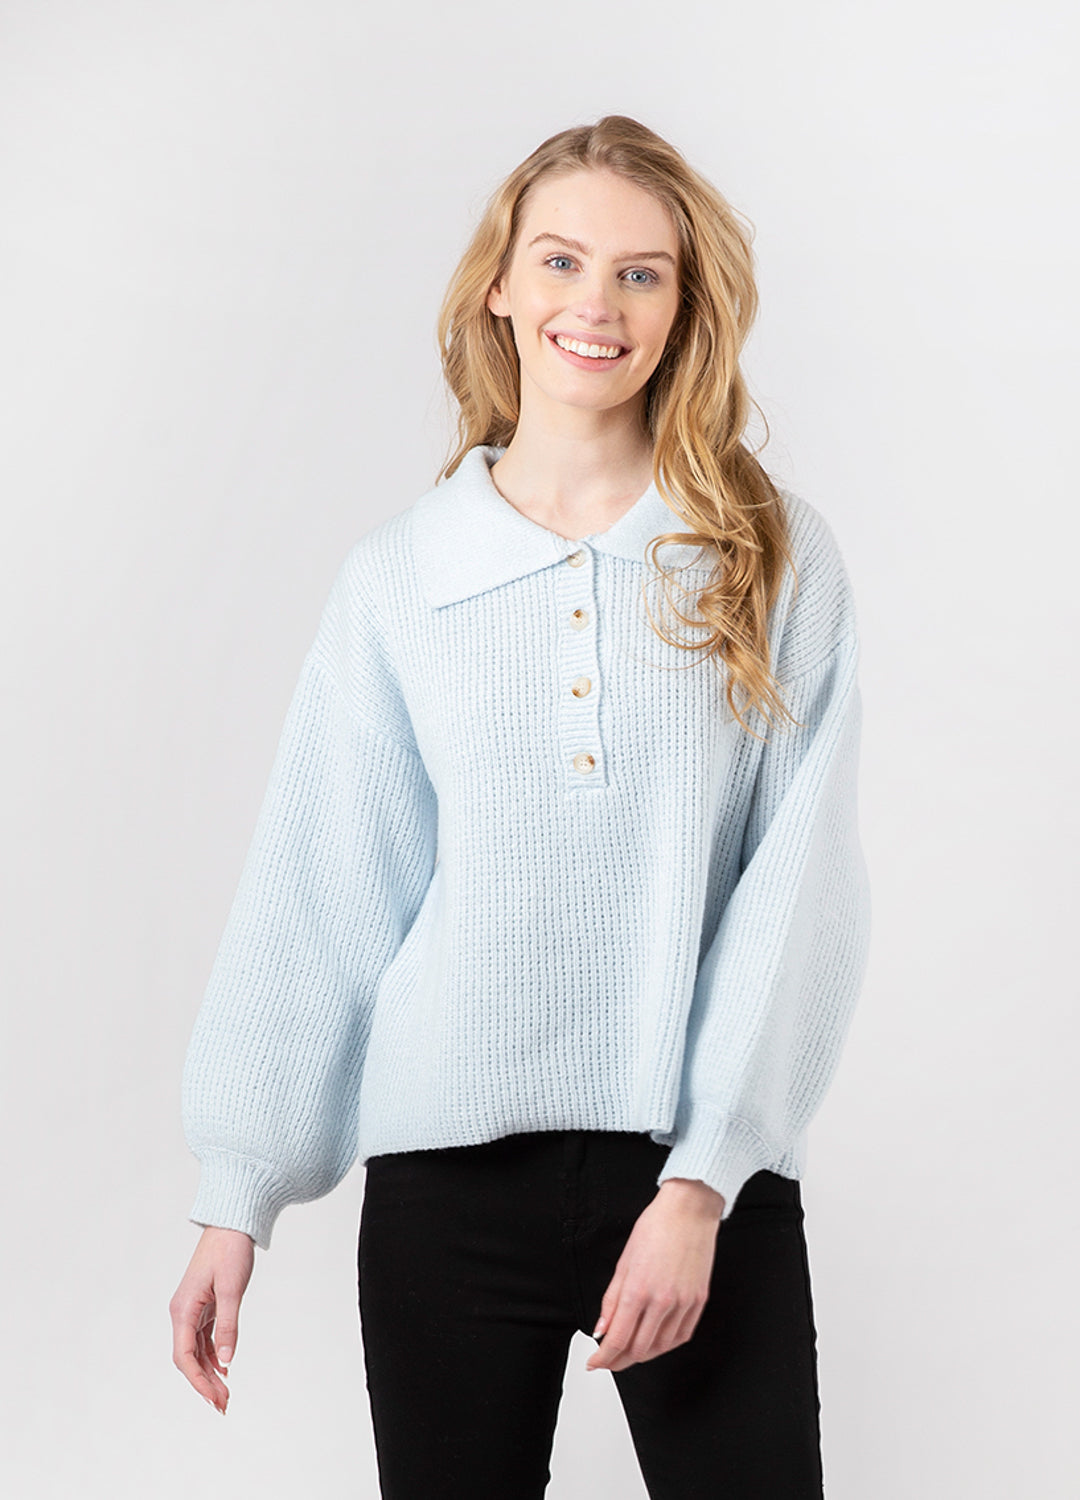 Lyla + Luxe knitwear Devine Ribbed Sweater in Baby Blue colour at Inner Beach Co, Toronto, Ontario, Canada